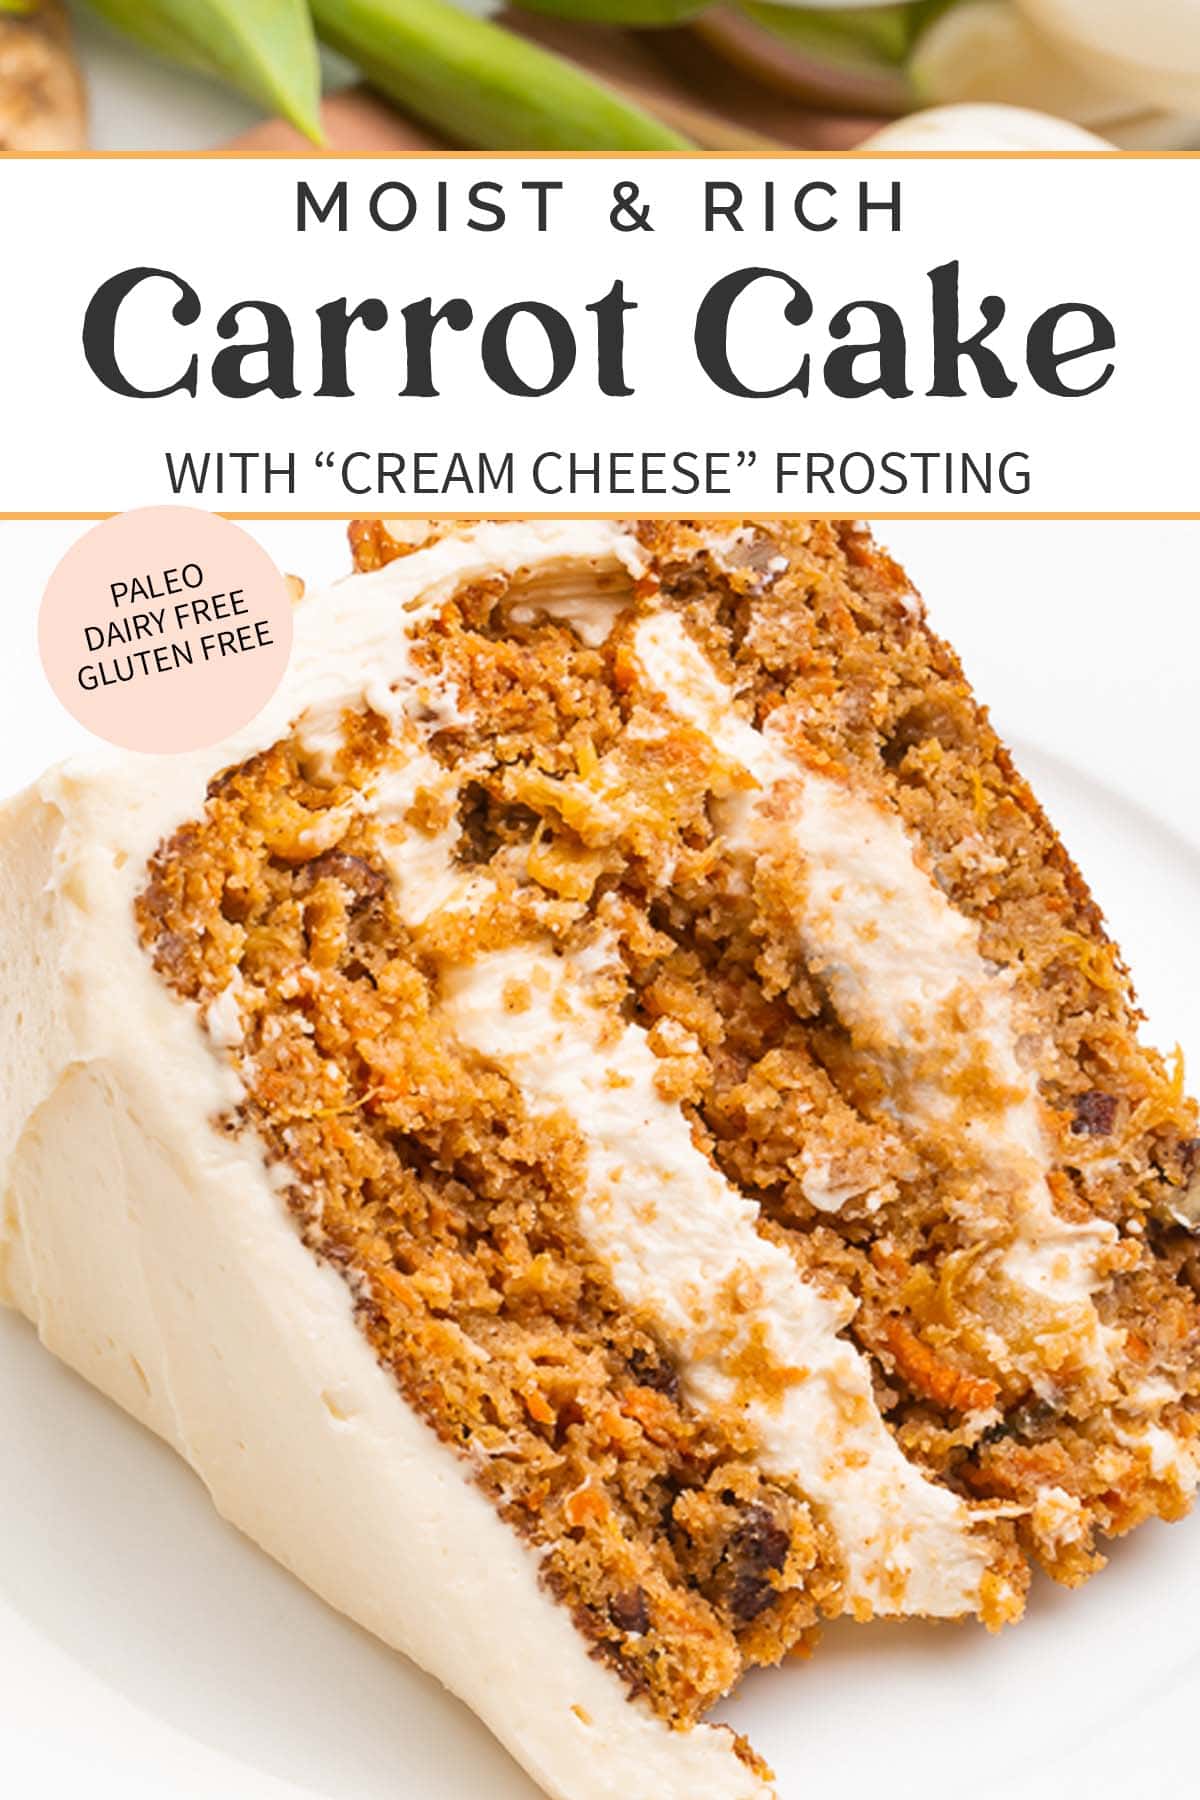 Pin graphic for paleo carrot cake.